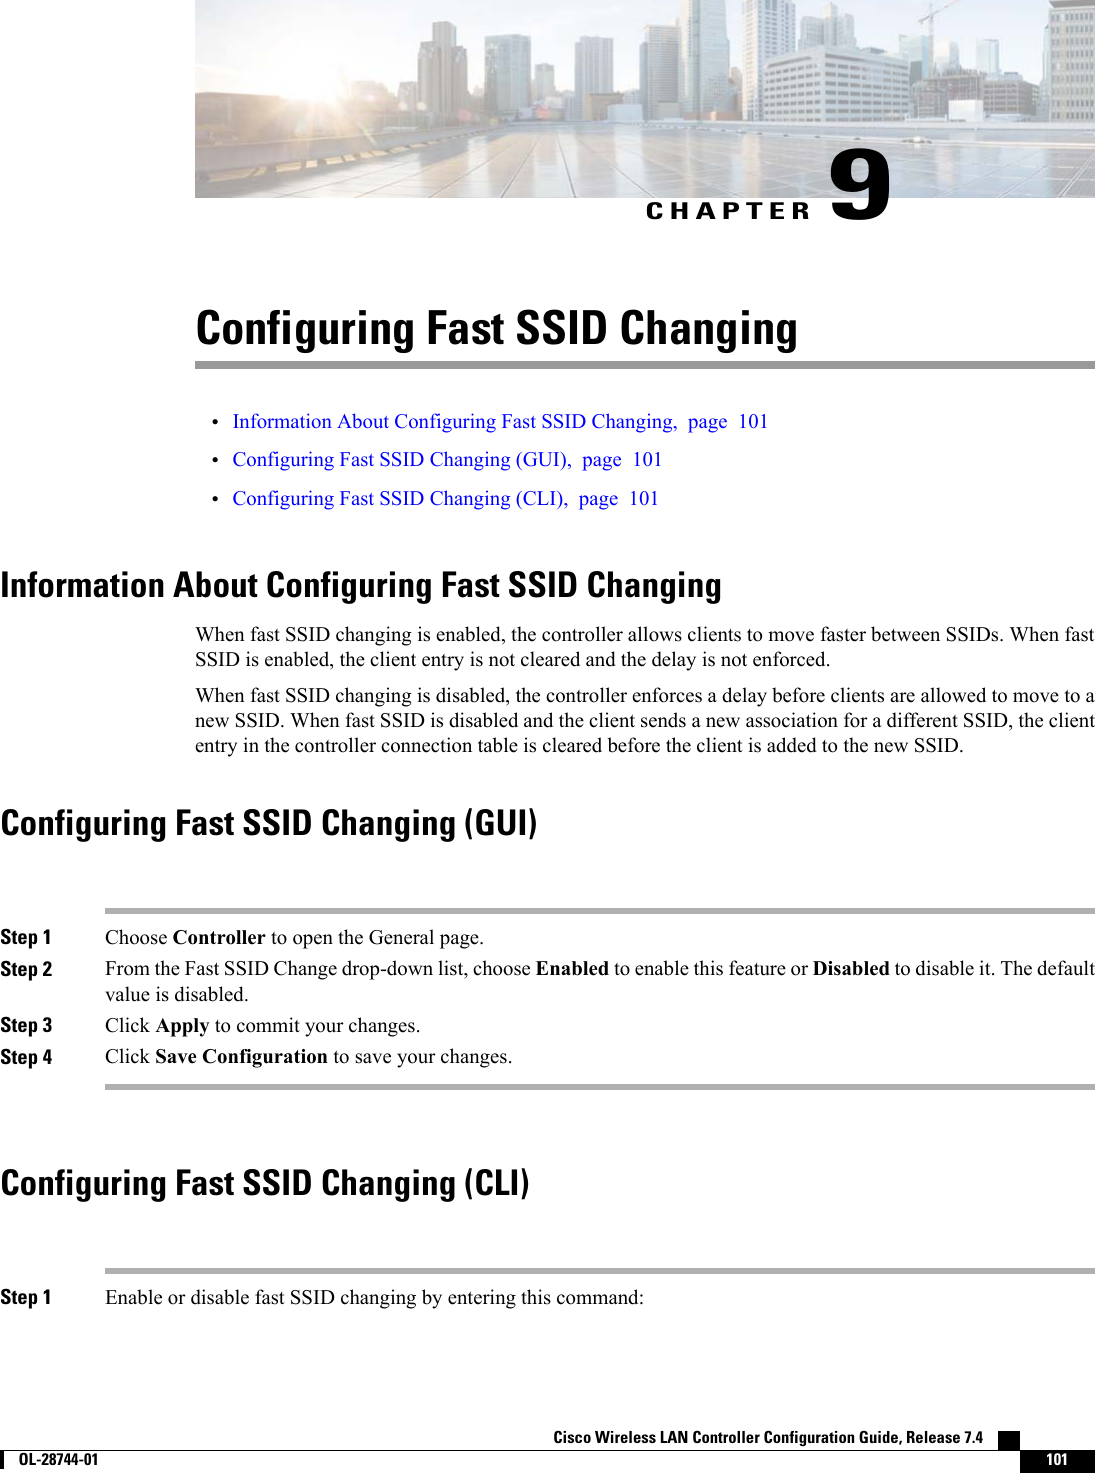 CHAPTER 9Configuring Fast SSID Changing•Information About Configuring Fast SSID Changing, page 101•Configuring Fast SSID Changing (GUI), page 101•Configuring Fast SSID Changing (CLI), page 101Information About Configuring Fast SSID ChangingWhen fast SSID changing is enabled, the controller allows clients to move faster between SSIDs. When fastSSID is enabled, the client entry is not cleared and the delay is not enforced.When fast SSID changing is disabled, the controller enforces a delay before clients are allowed to move to anew SSID. When fast SSID is disabled and the client sends a new association for a different SSID, the cliententry in the controller connection table is cleared before the client is added to the new SSID.Configuring Fast SSID Changing (GUI)Step 1 Choose Controller to open the General page.Step 2 From the Fast SSID Change drop-down list, choose Enabled to enable this feature or Disabled to disable it. The defaultvalue is disabled.Step 3 Click Apply to commit your changes.Step 4 Click Save Configuration to save your changes.Configuring Fast SSID Changing (CLI)Step 1 Enable or disable fast SSID changing by entering this command:Cisco Wireless LAN Controller Configuration Guide, Release 7.4        OL-28744-01 101